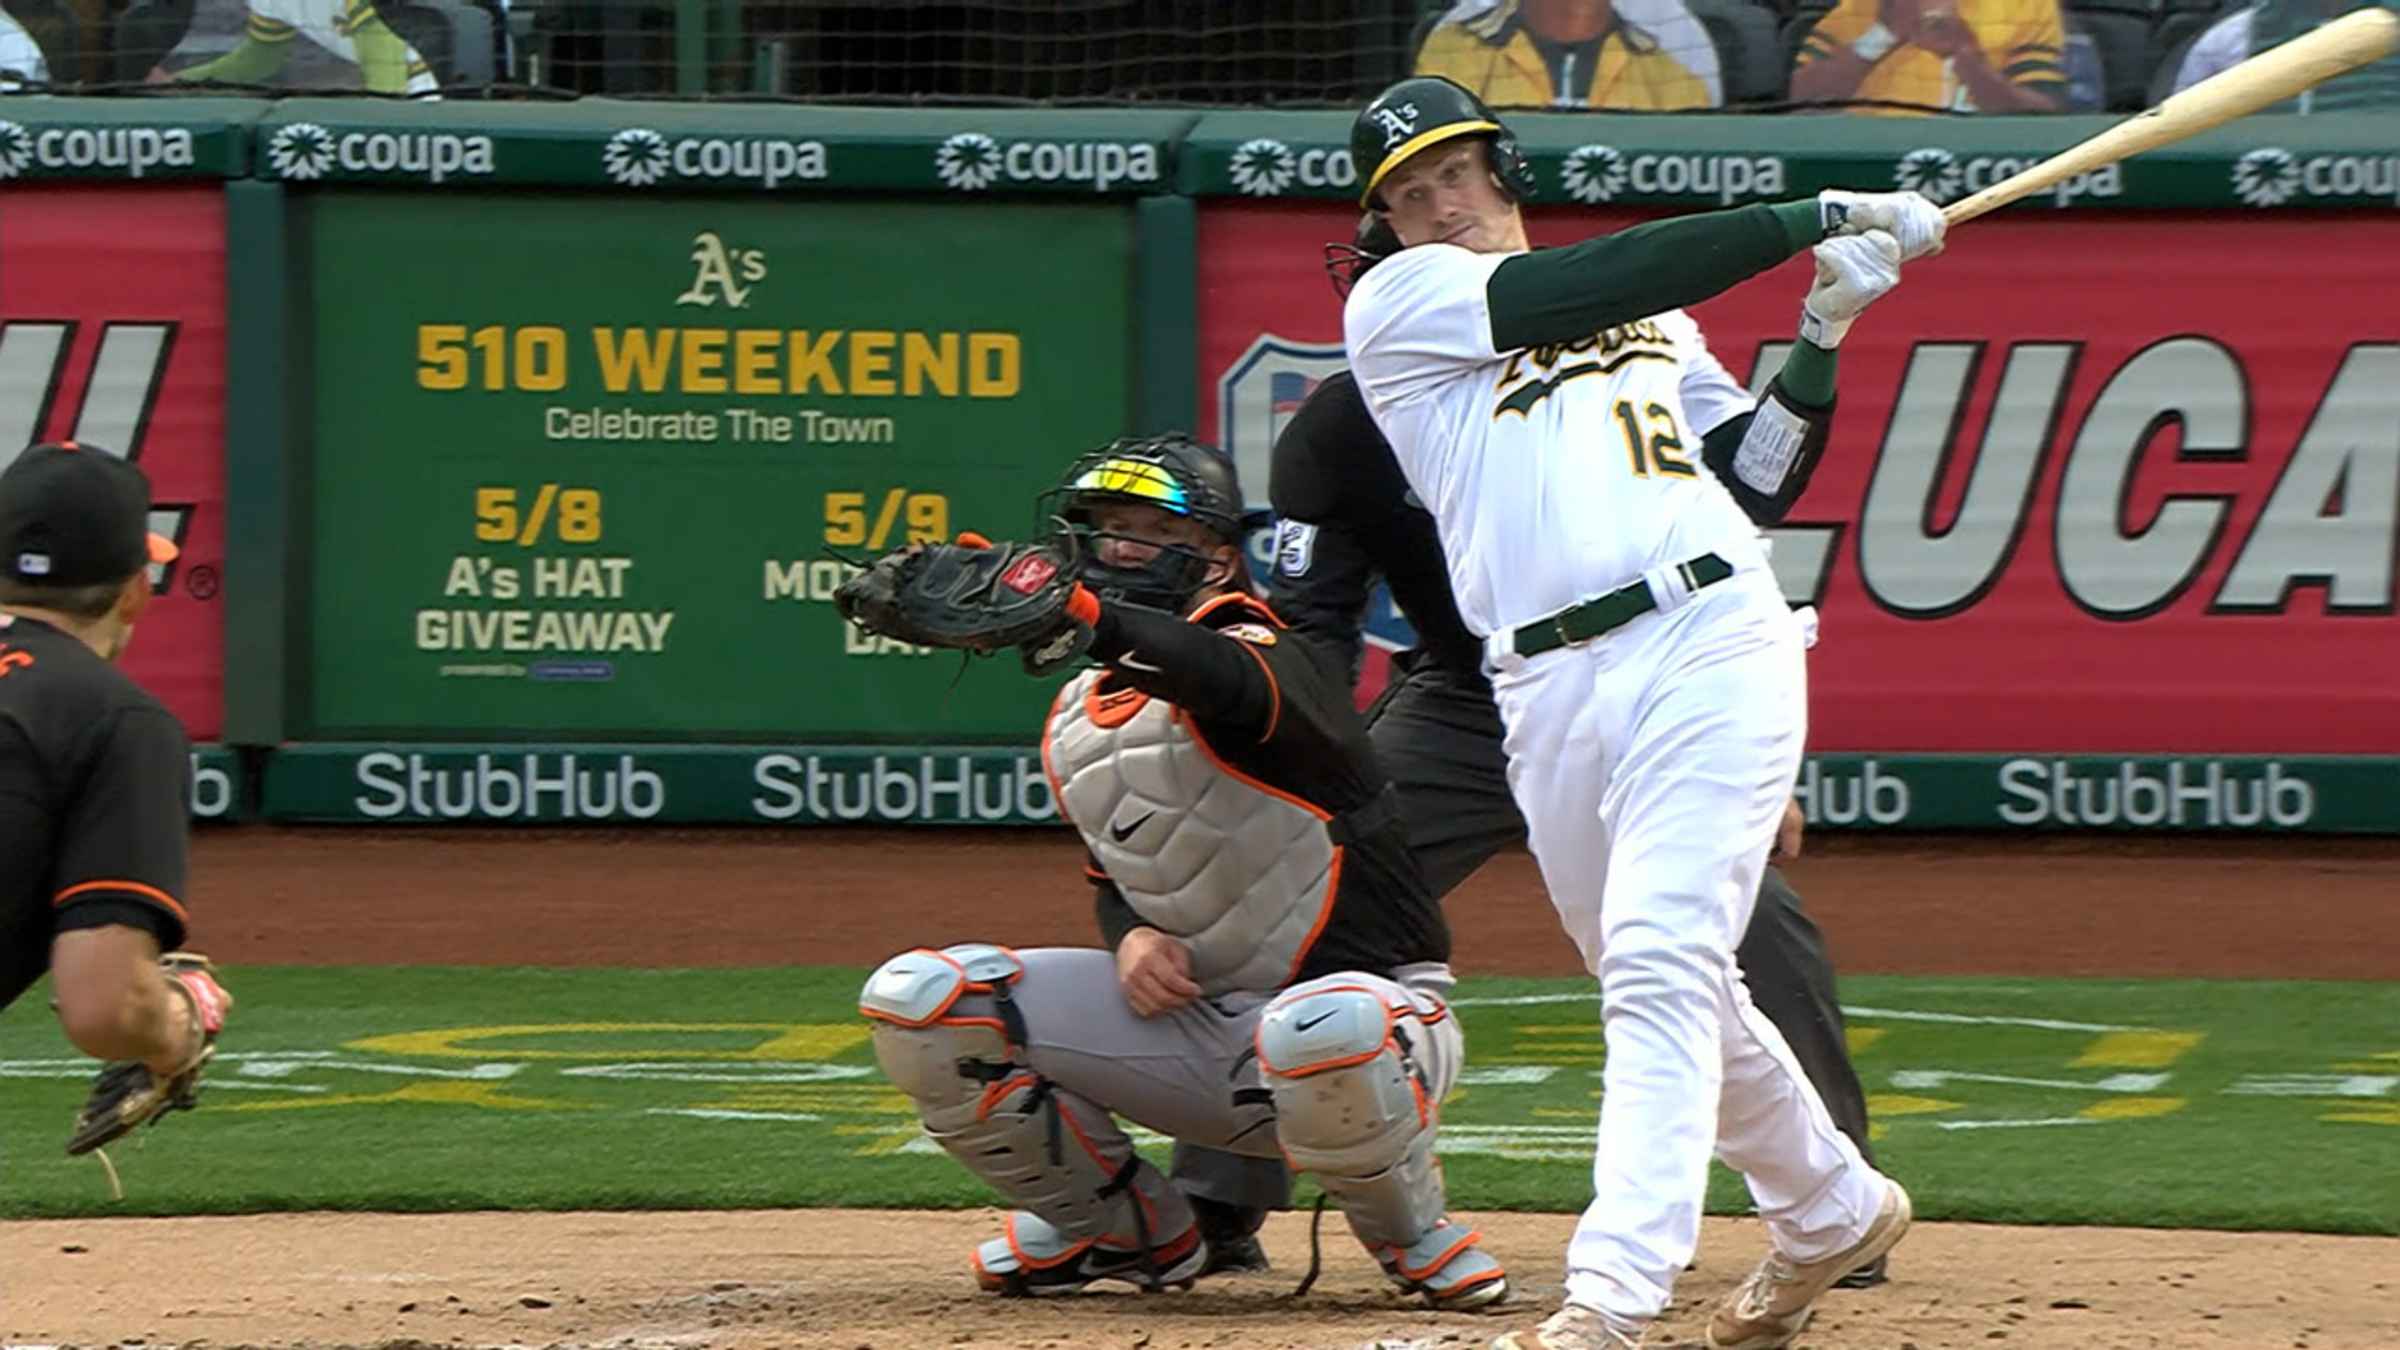 Sean Murphy social media is funny, after 3-run HR for A's 